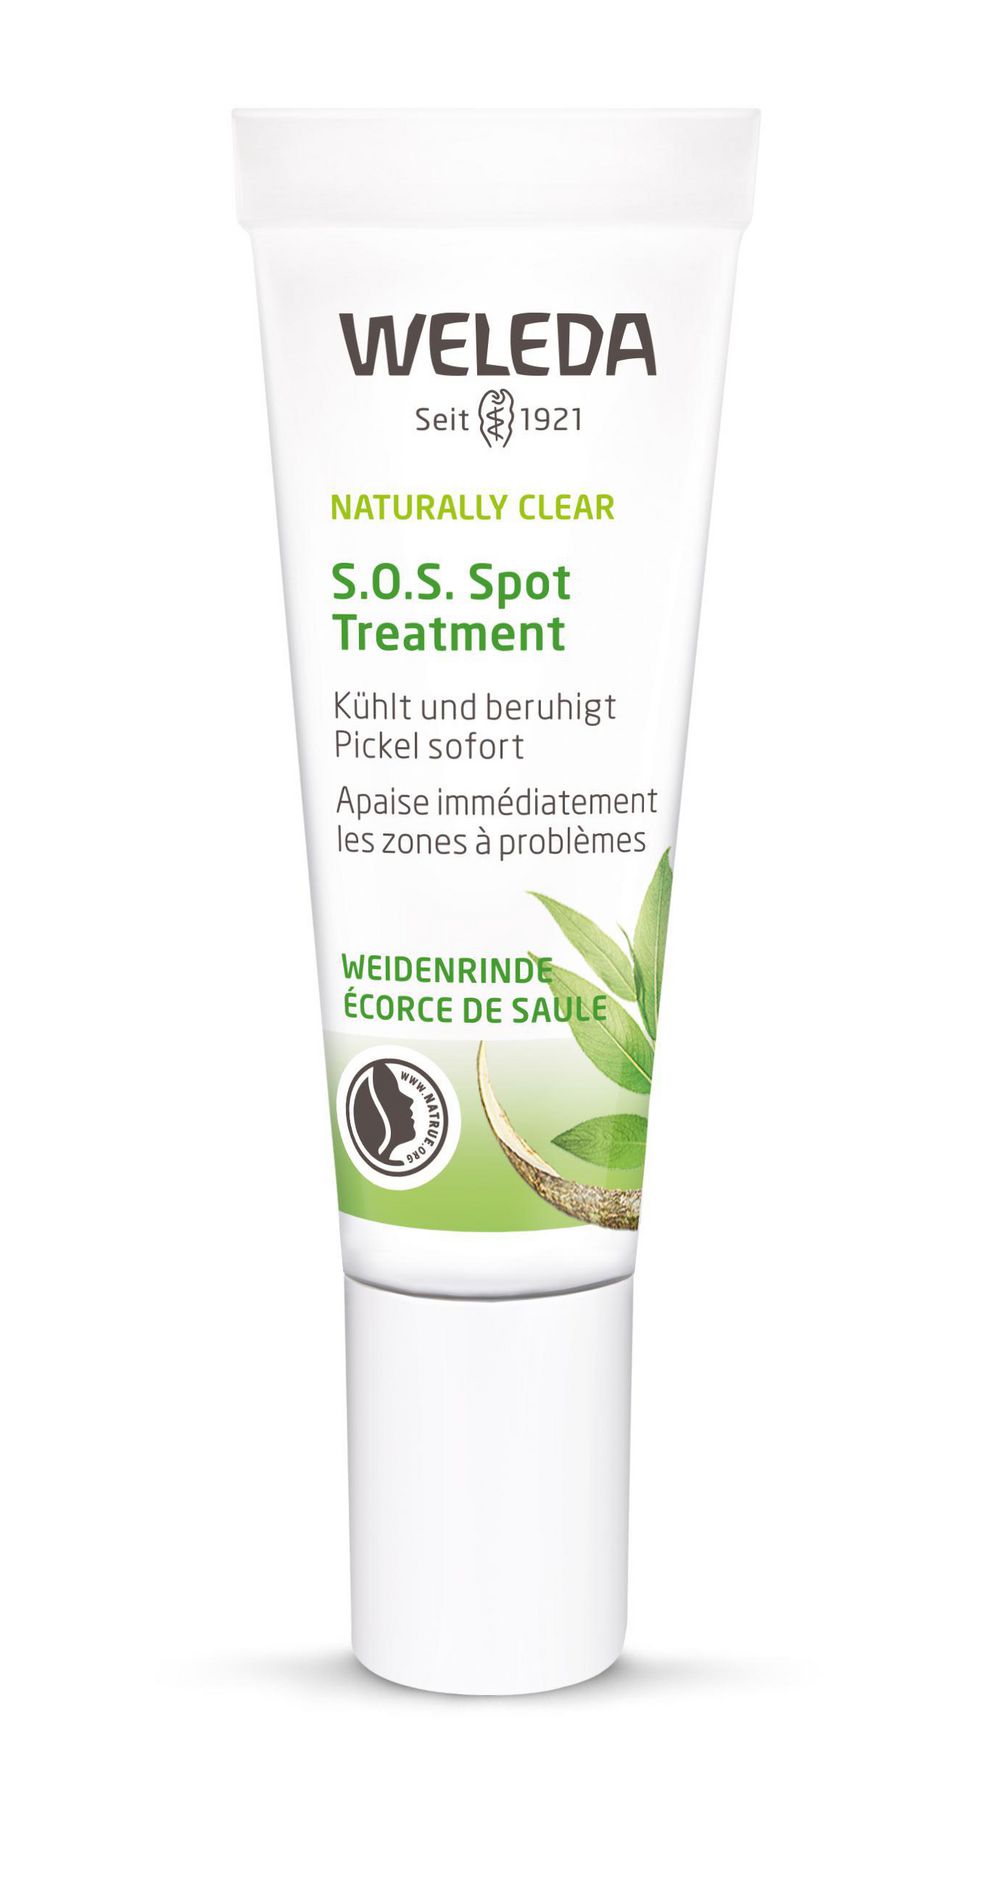 NATURALLY CLEAR S.O.S. spot treatment